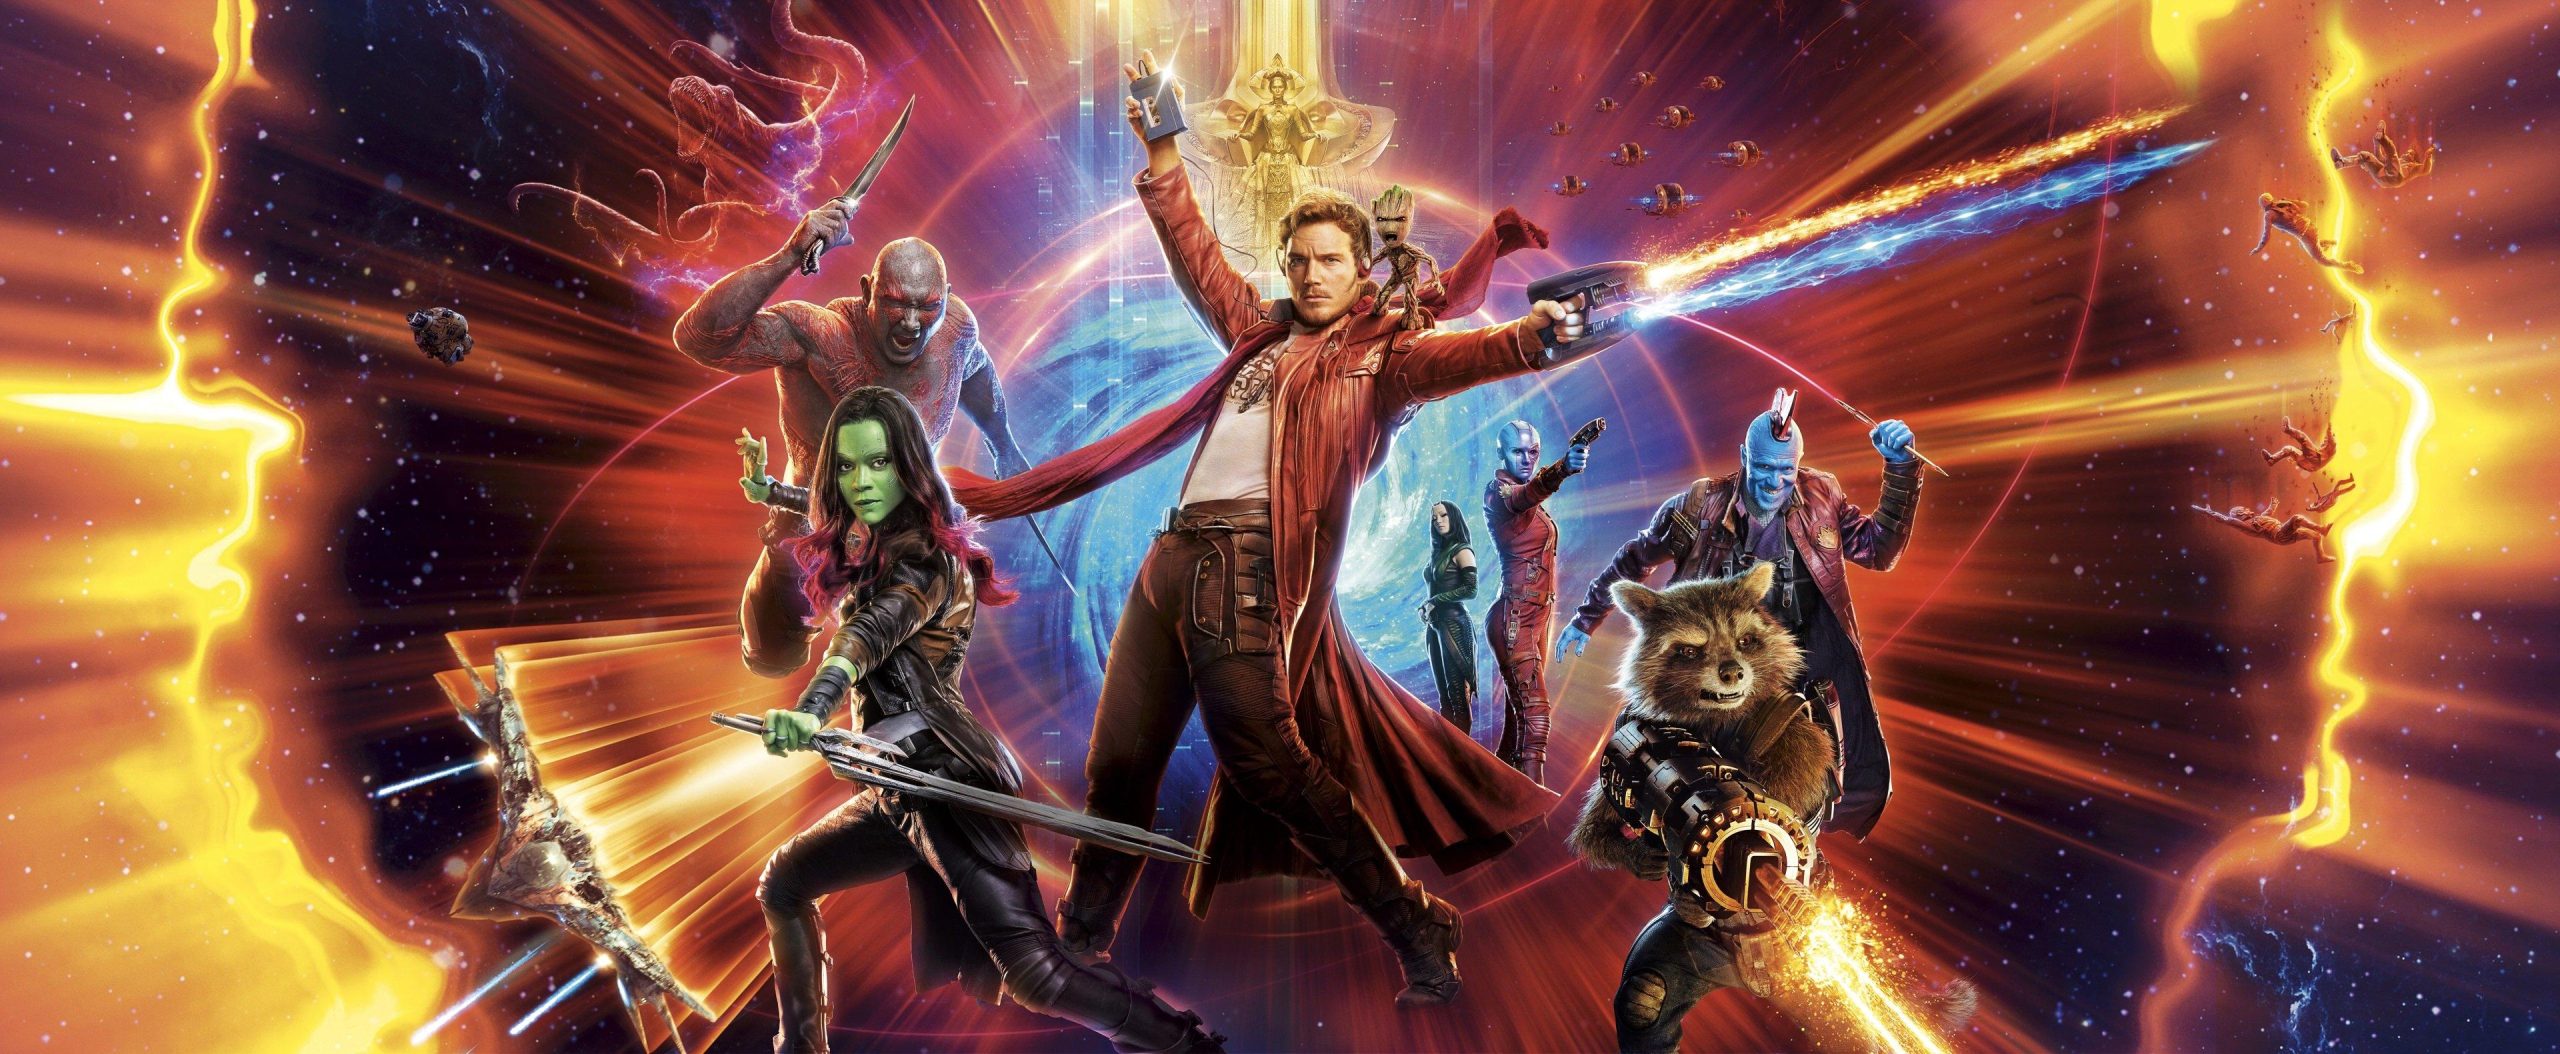 Guardians Of The Galaxy Vol3 Free 4K Wallpapers, Guardians Of The Galaxy Vol3, Movies